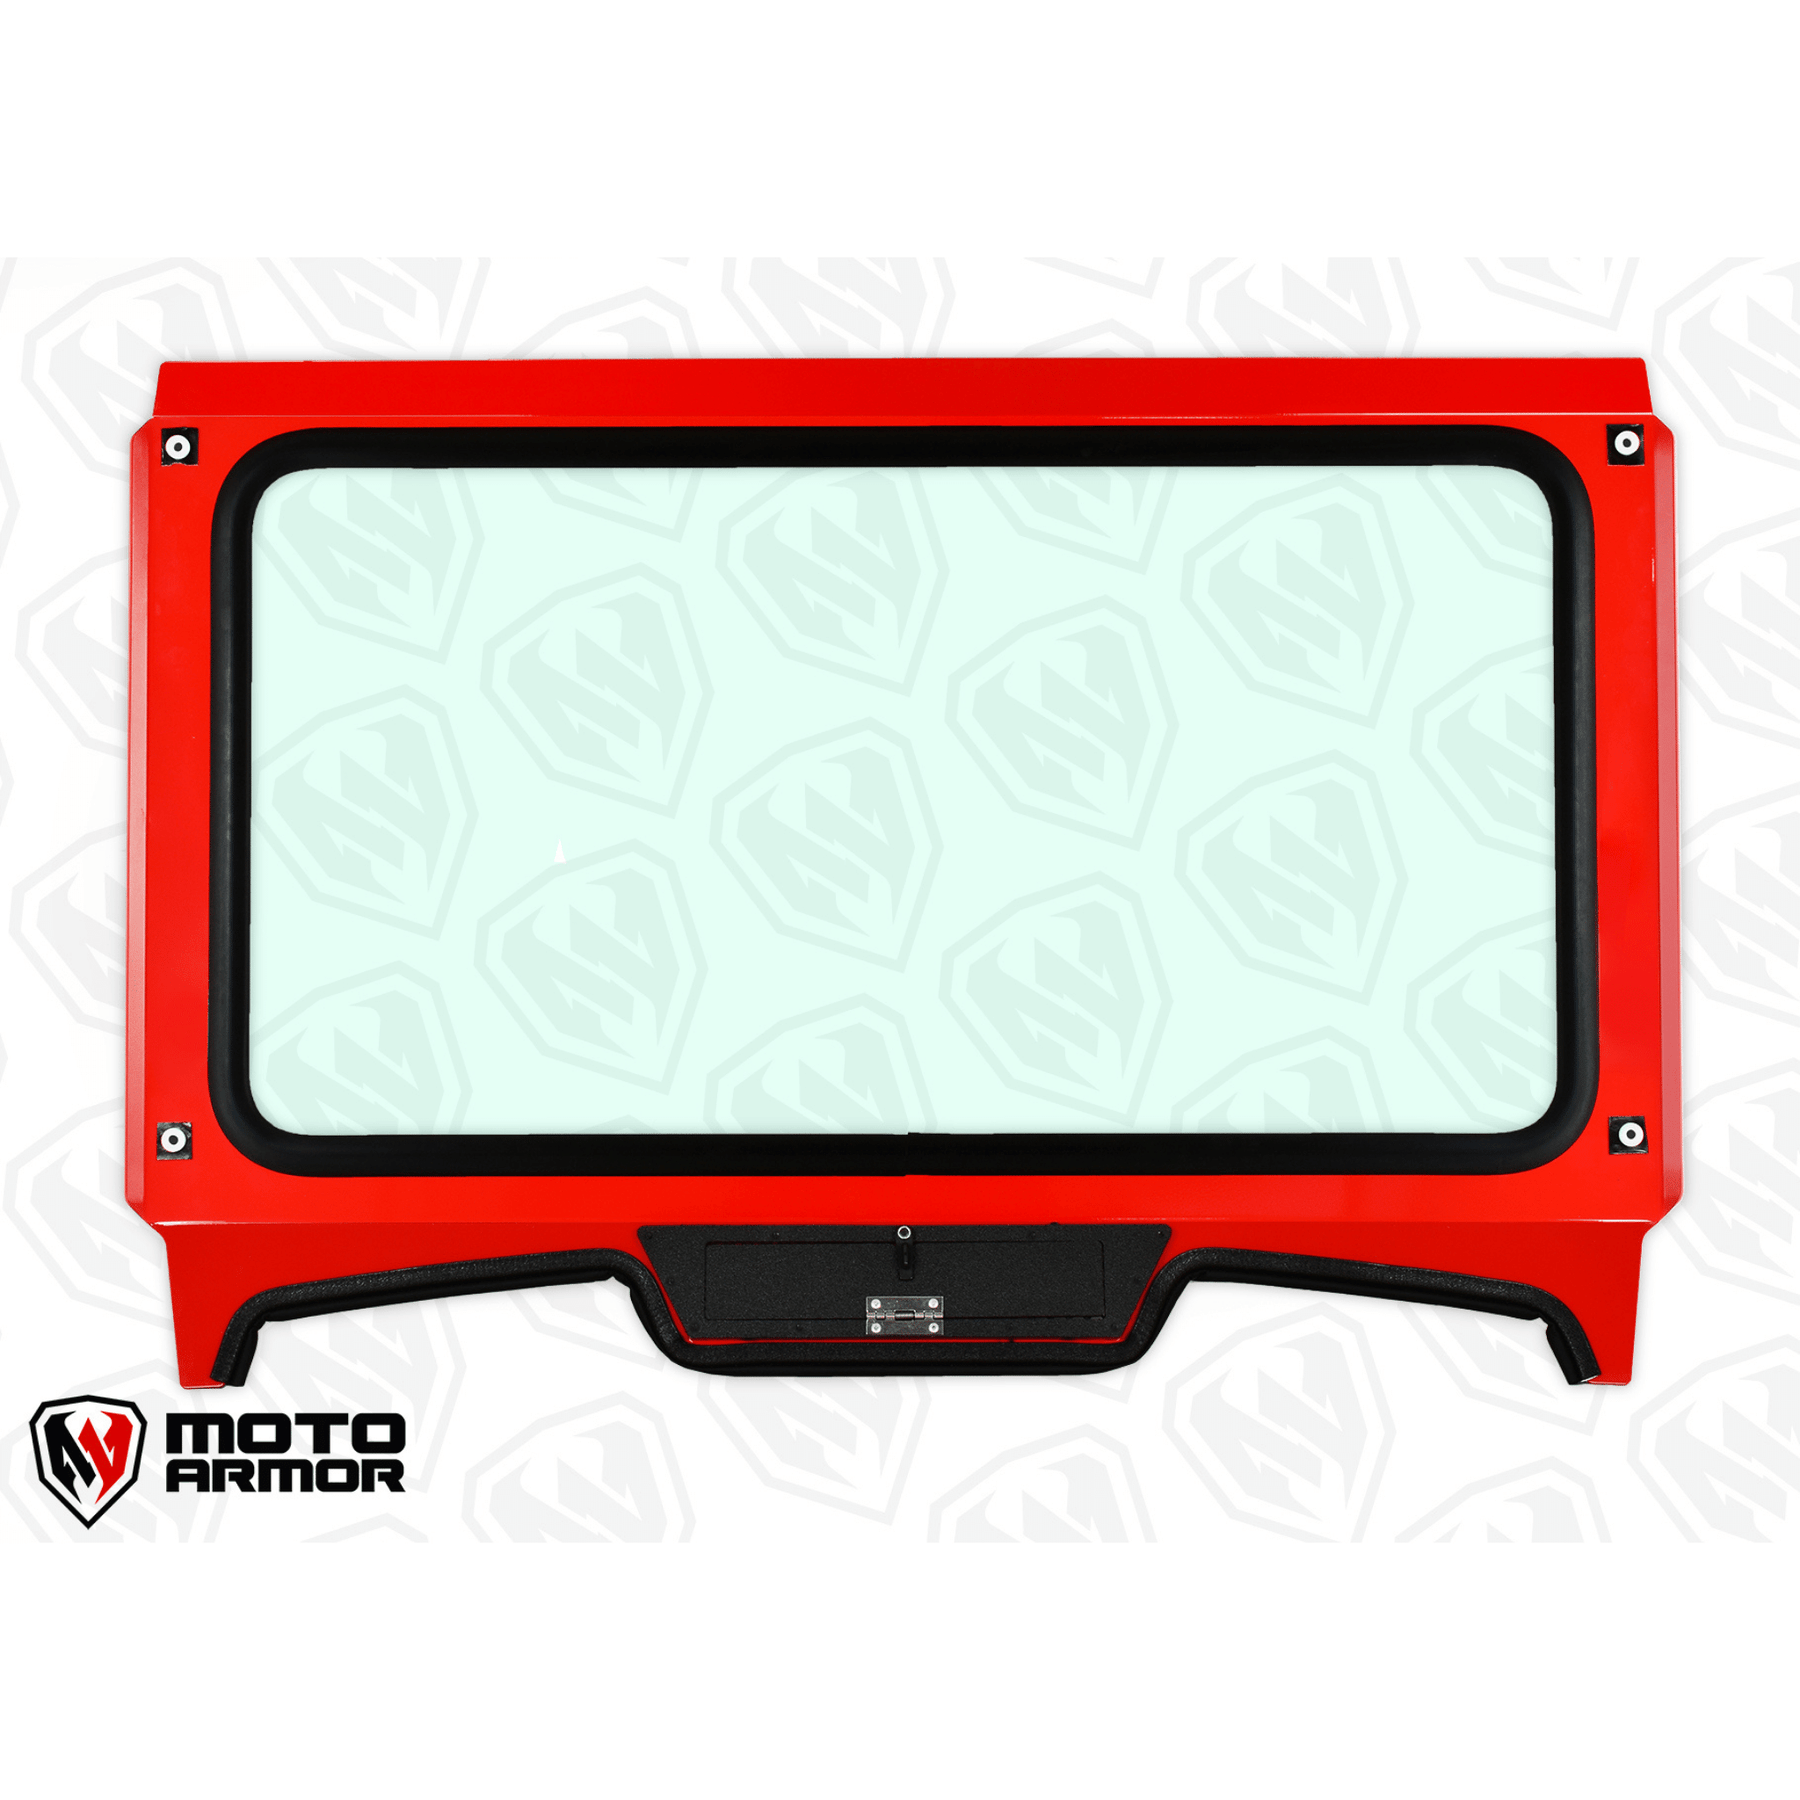 Polaris RZR Turbo S & XP 1000 Glass Windshield for CageWrx Super Shorty Cage (2019+)